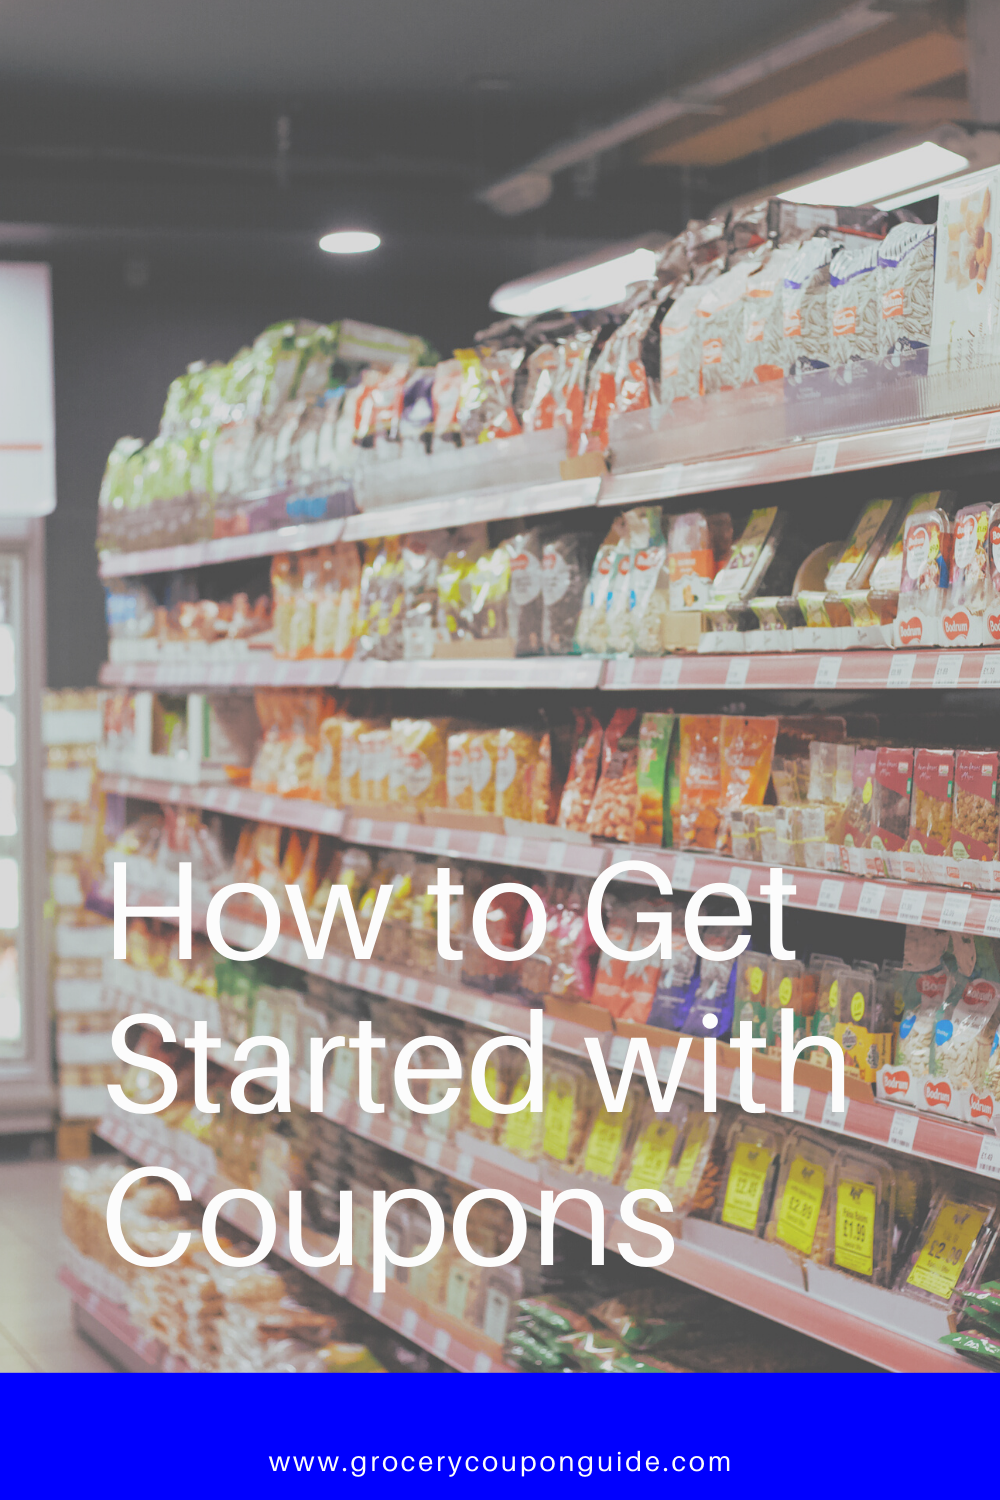 How to Get Started with Coupons